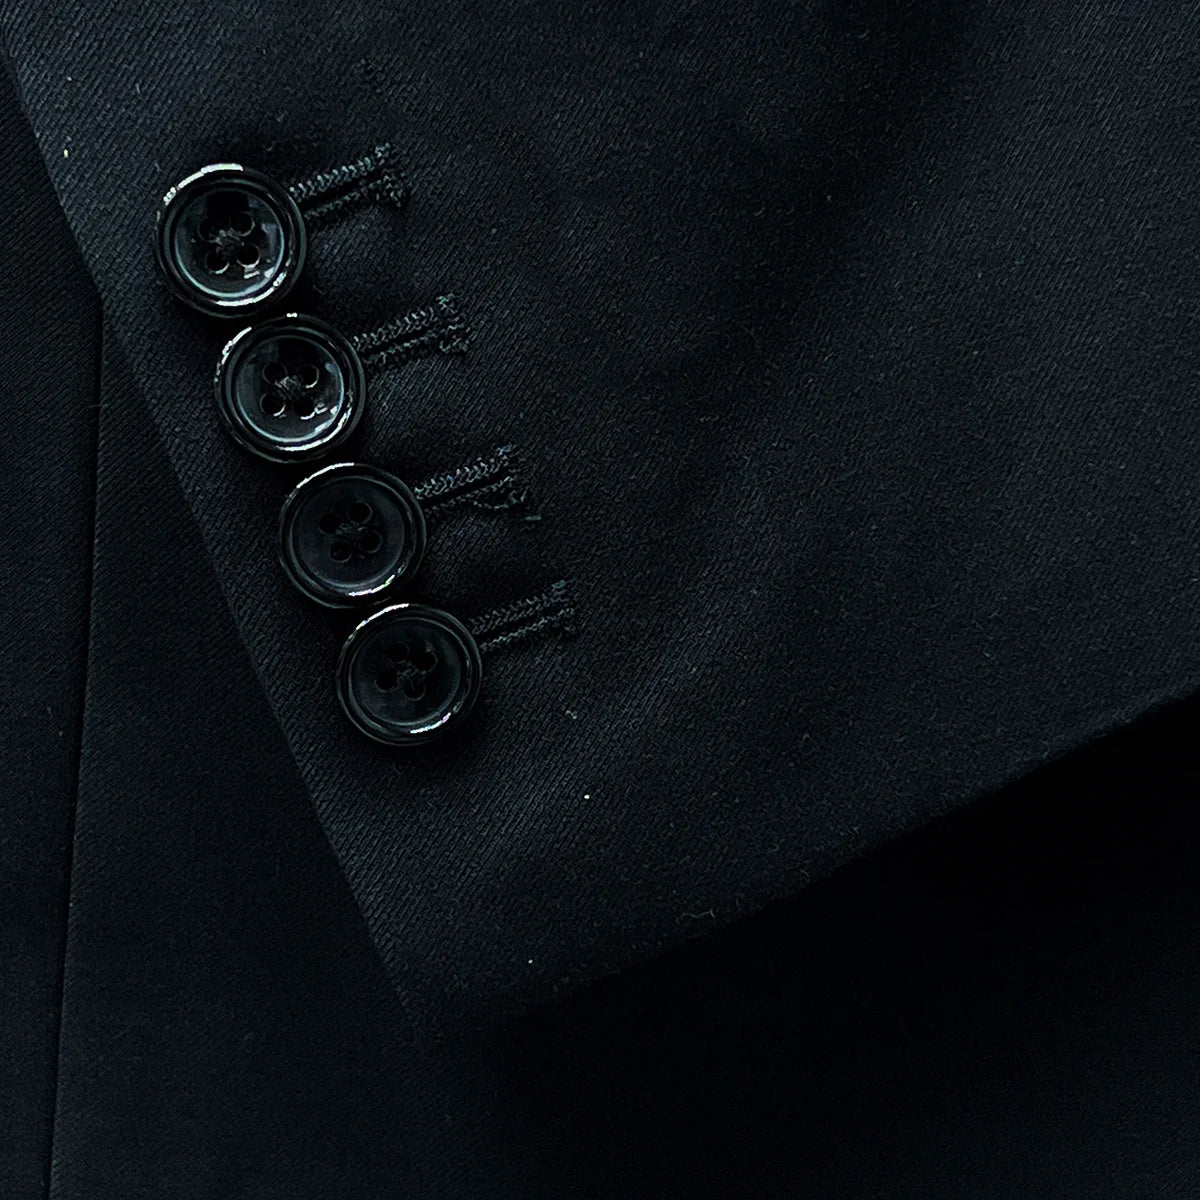 Functional sleeve buttonholes demonstrating practical design on a classic black men's suit.